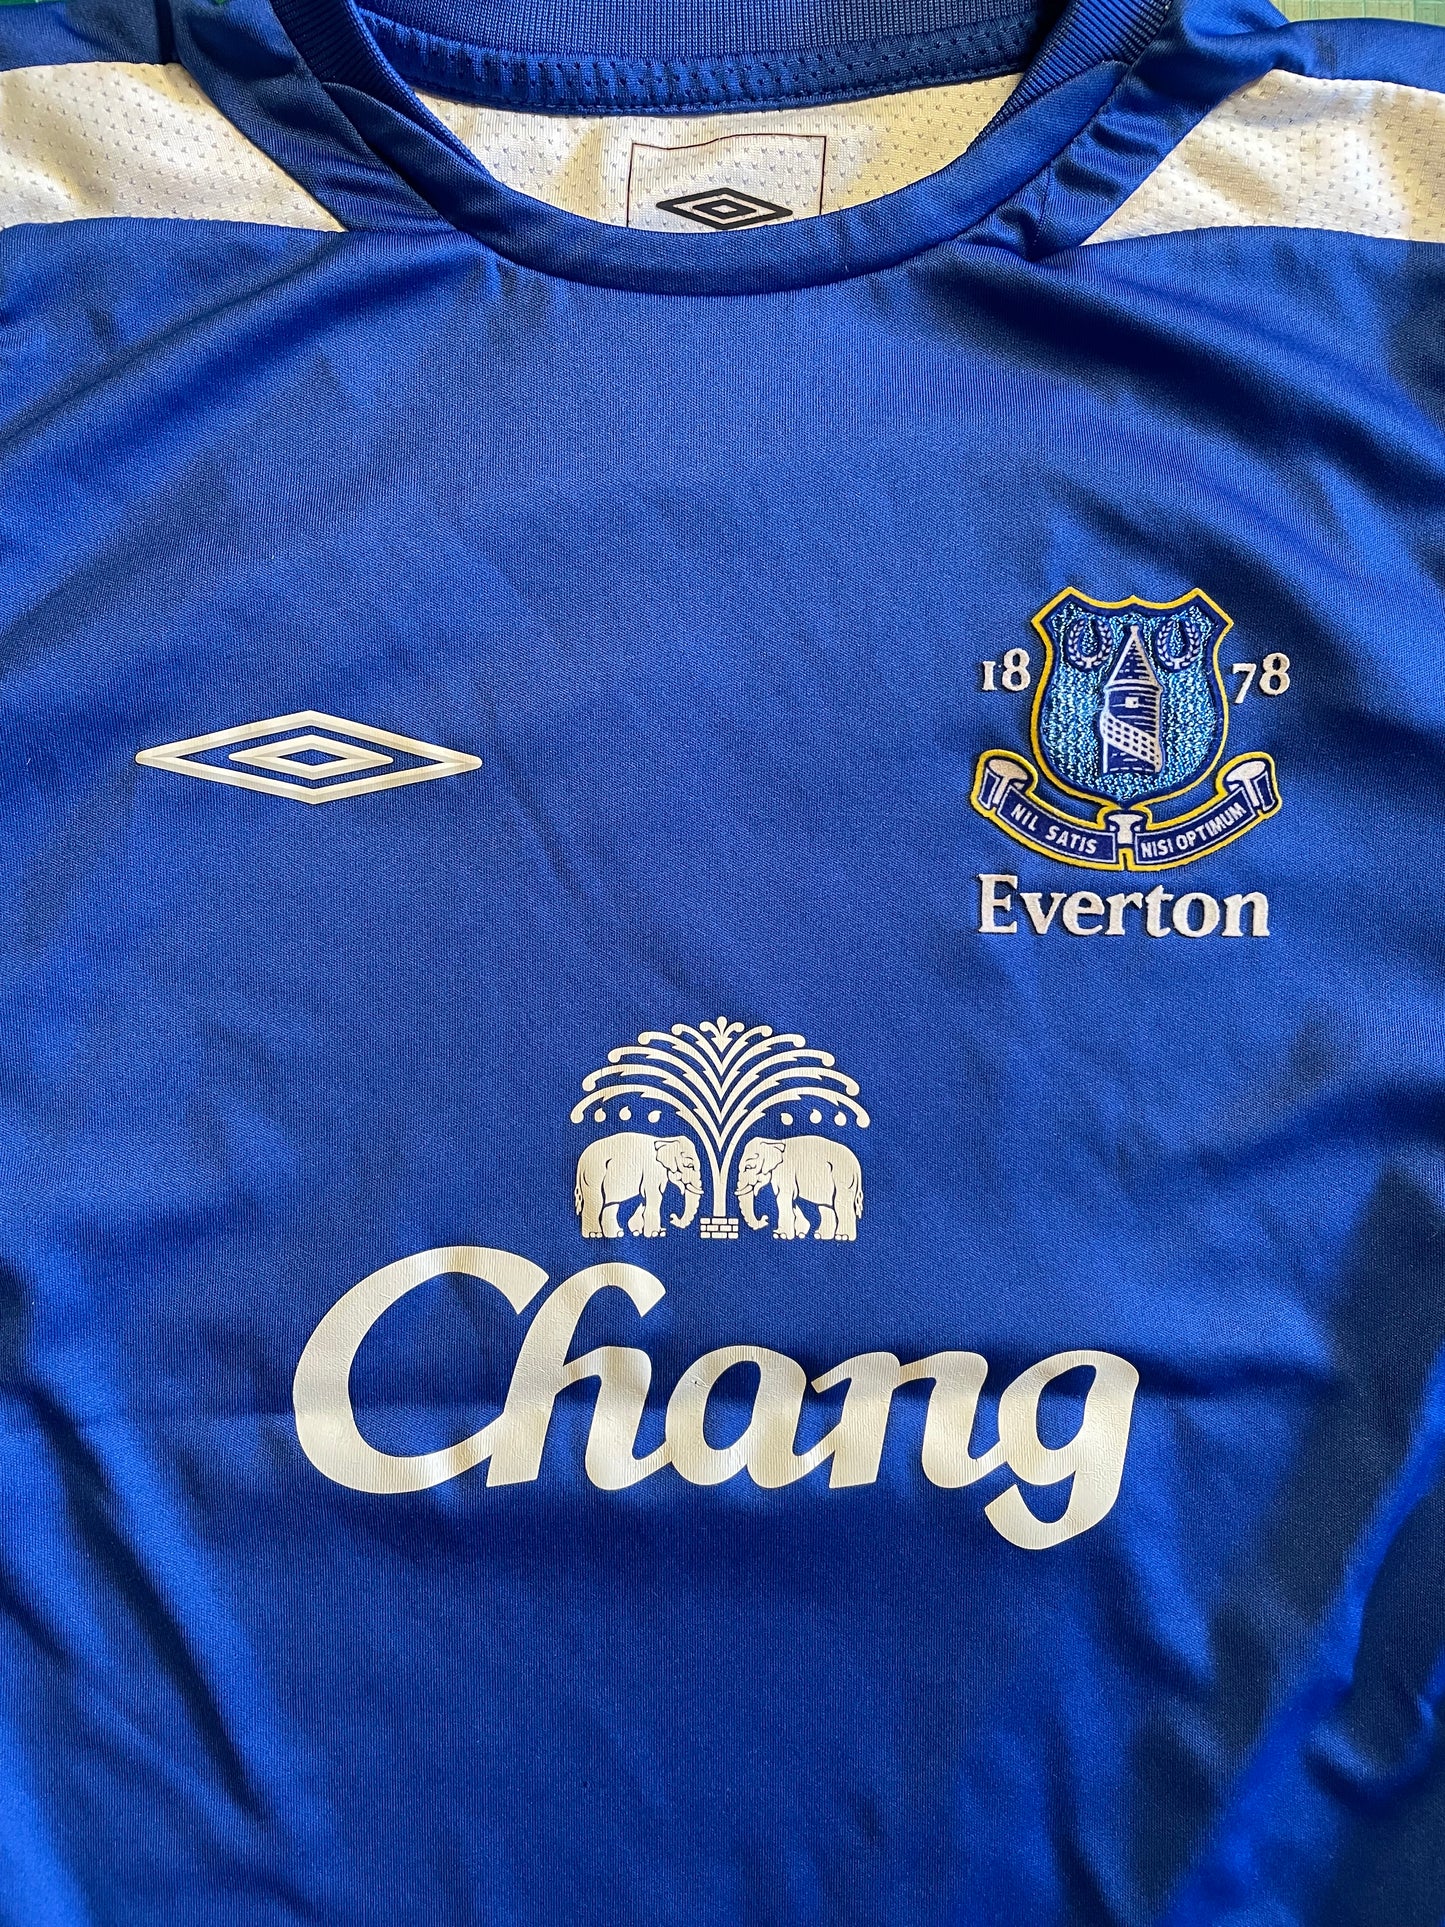 Everton 2005 Home Shirt (very good) Small Boys. Height 18 inches